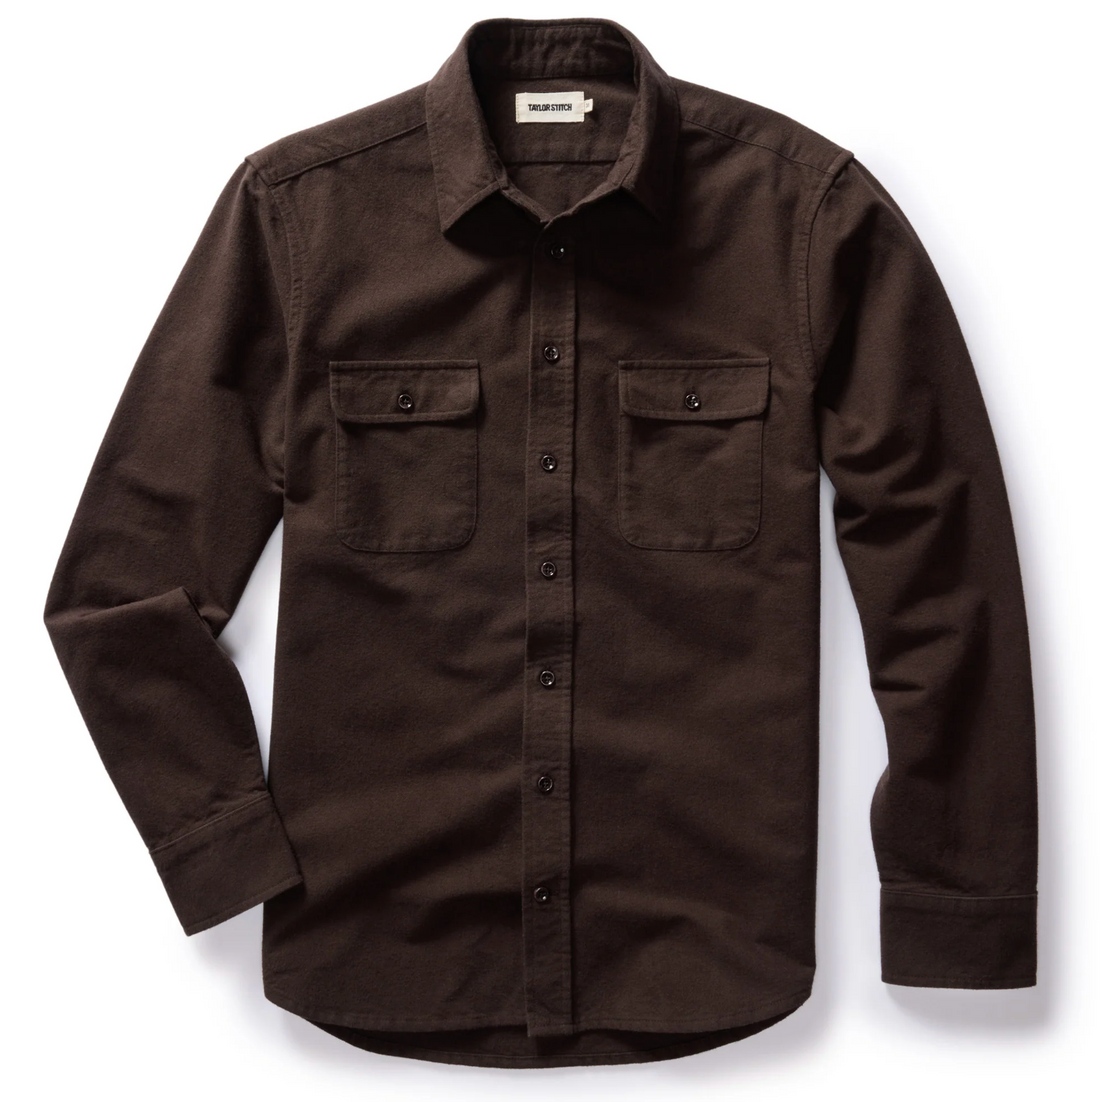 Taylor Stitch - The Yosemite Shirt in Soil